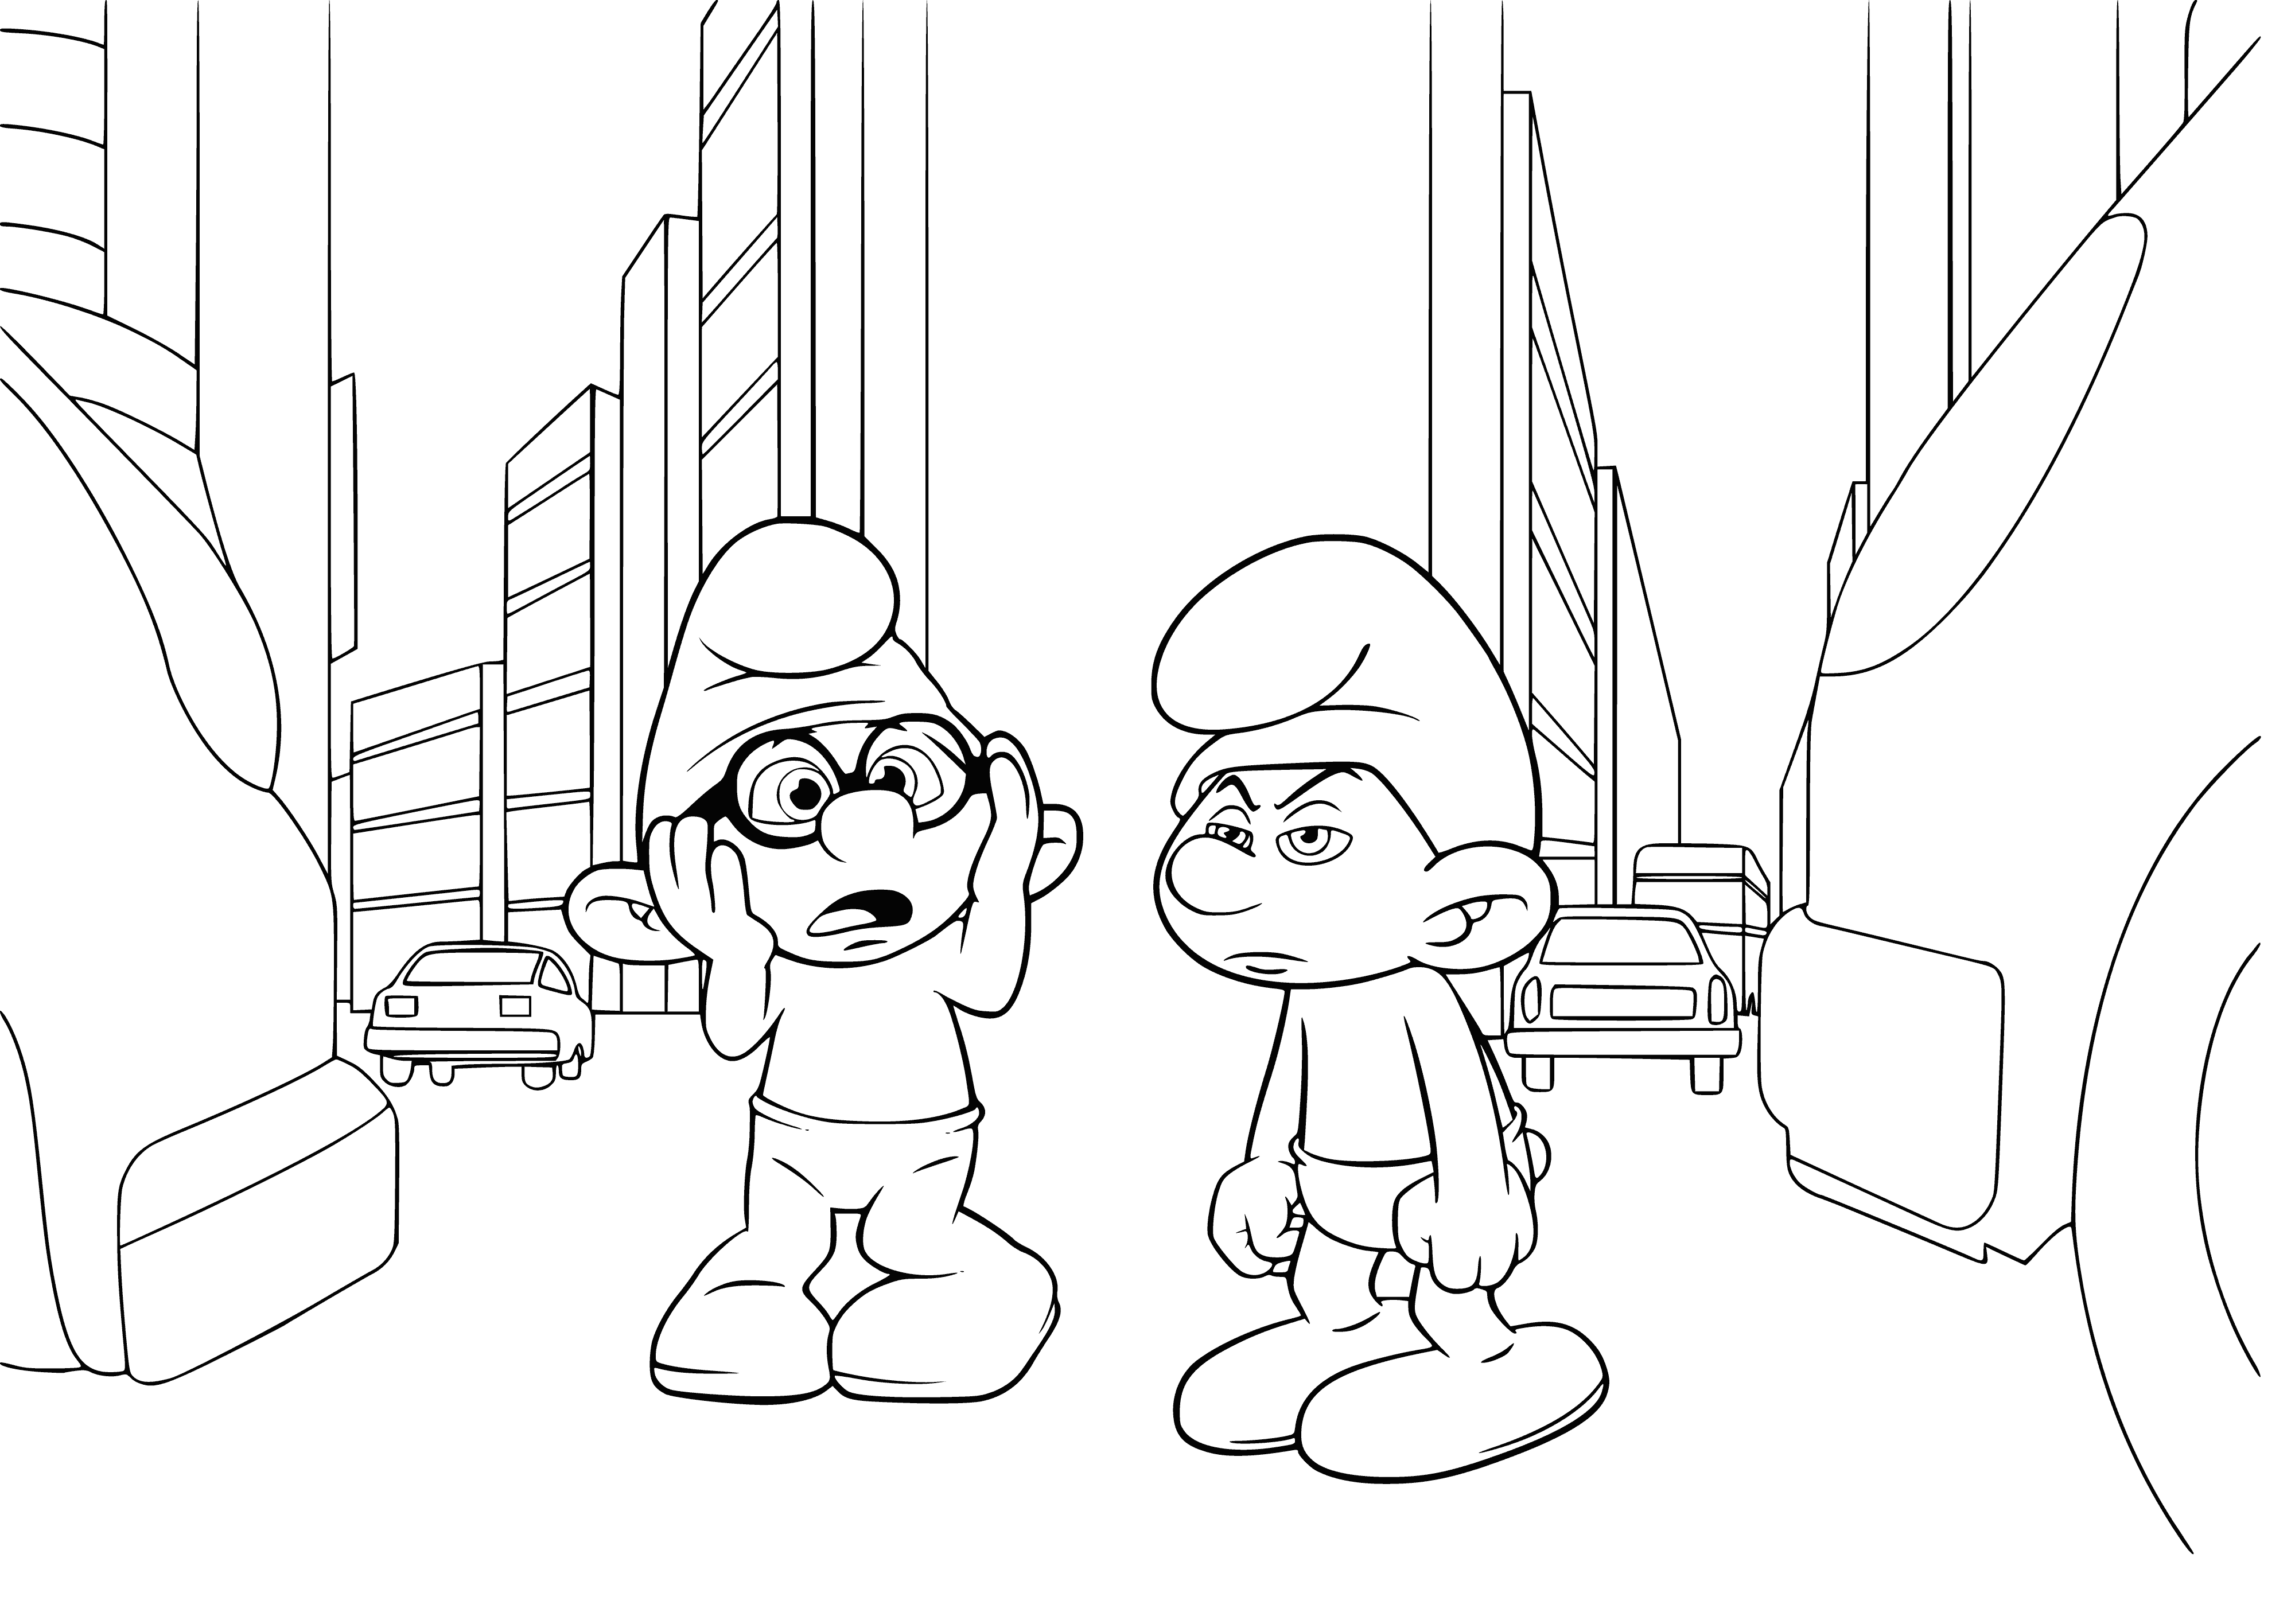 Smurf the Prudent and the Smurf Grumpy coloring page